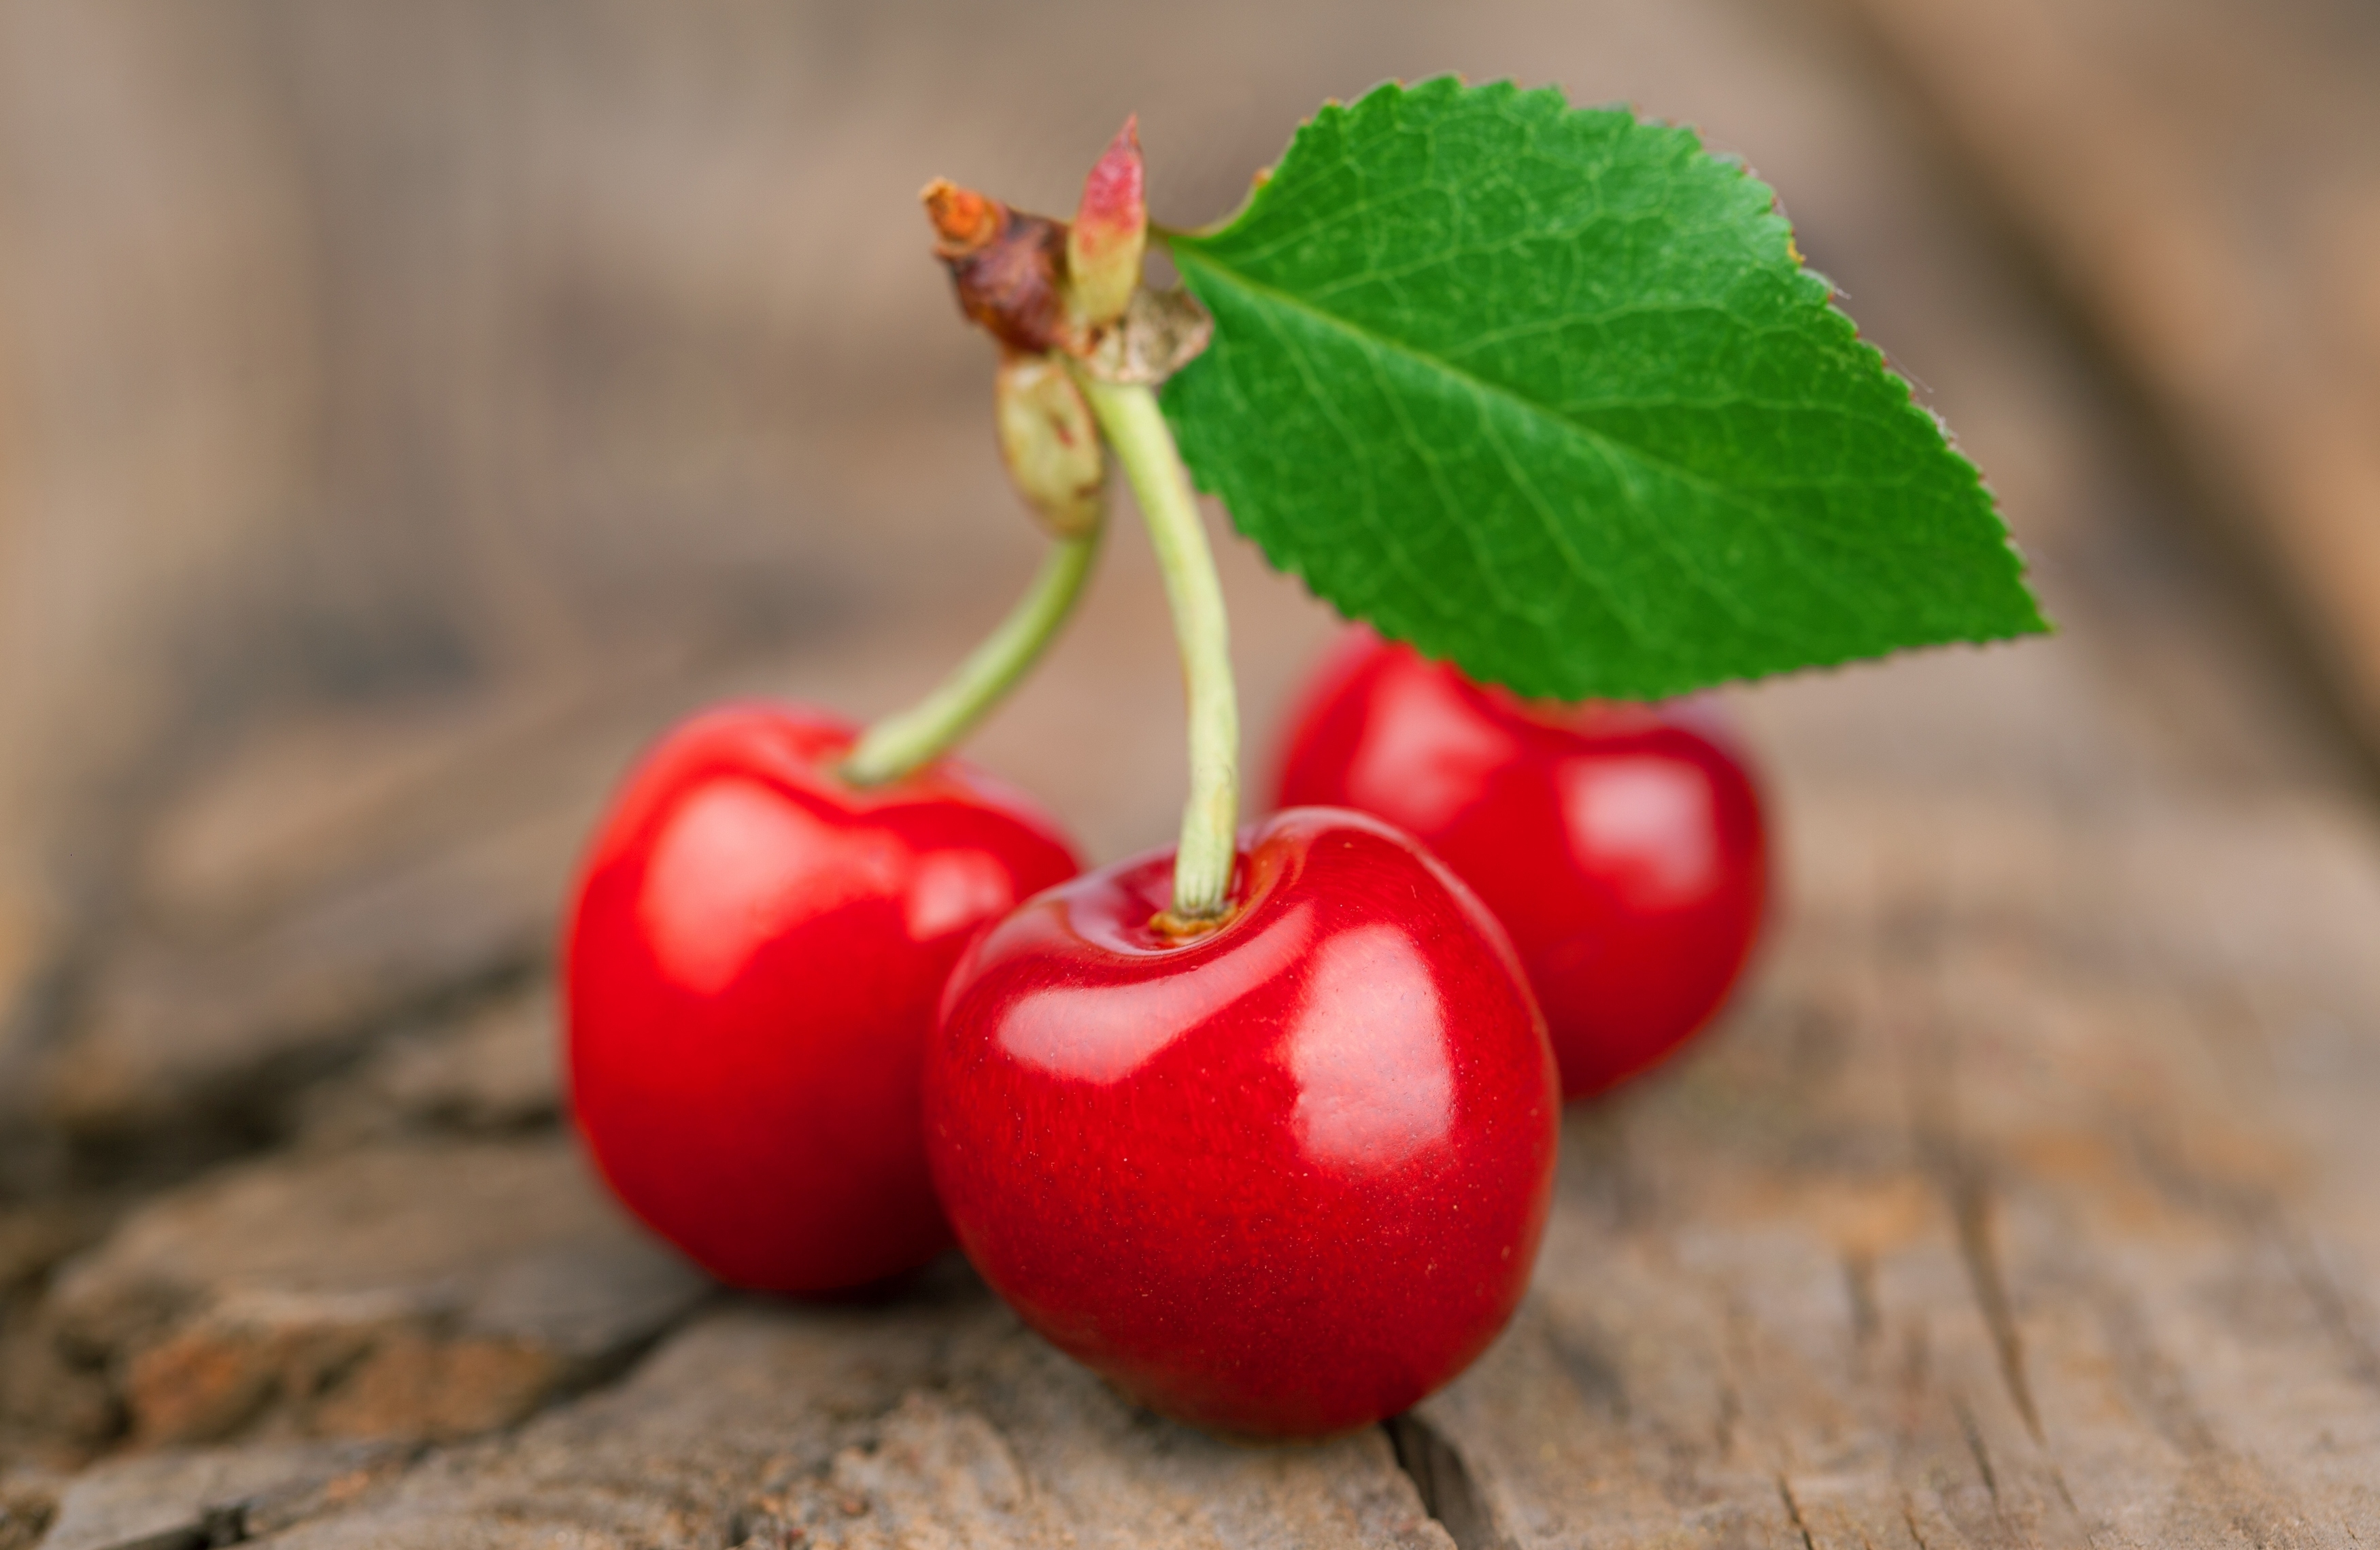 Wallpapers cherry fruits close on the desktop